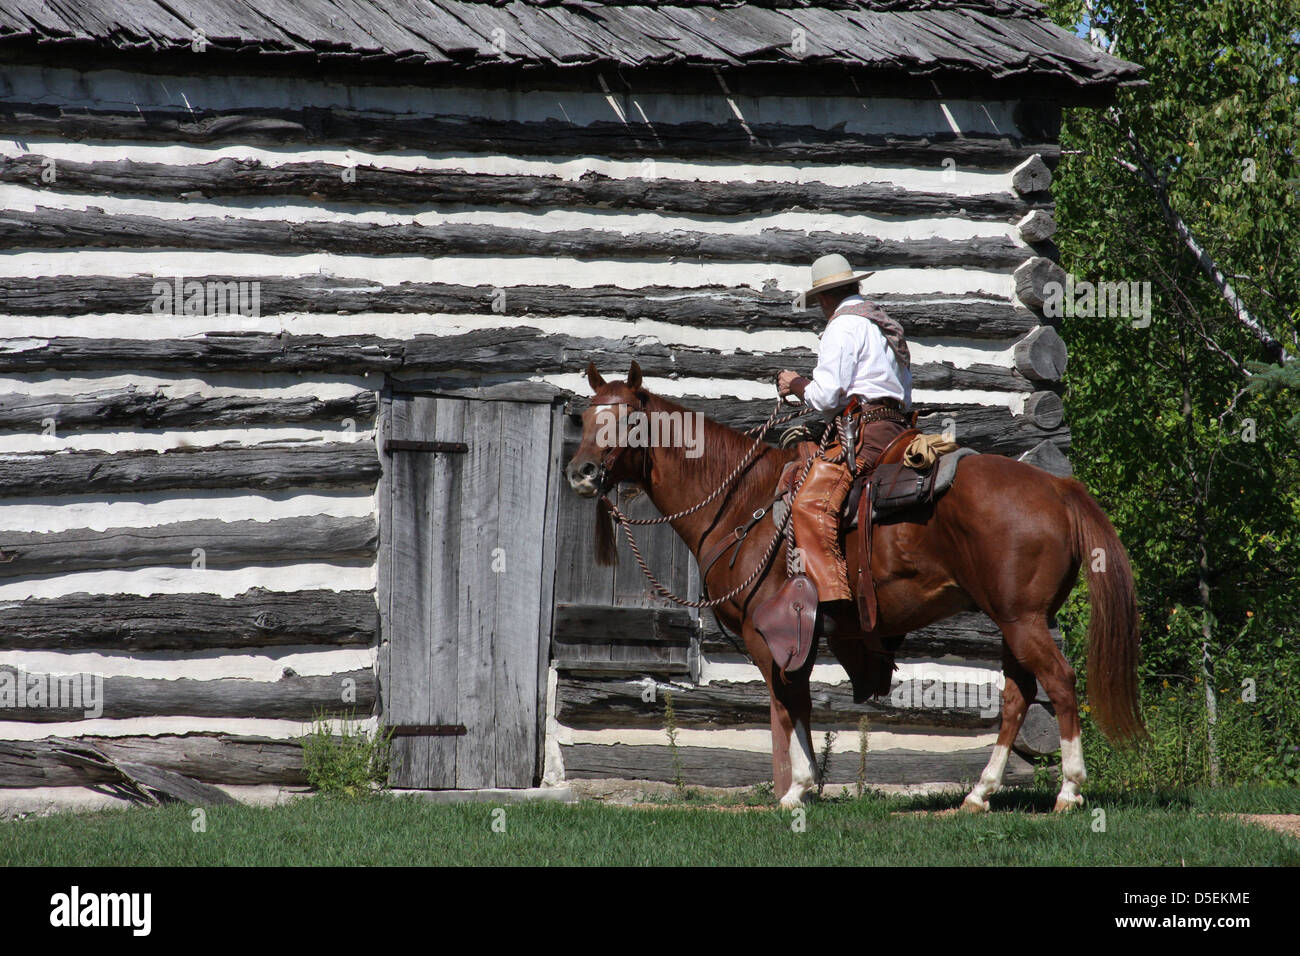 A cowboy and horse next to a log cabin Stock Photo